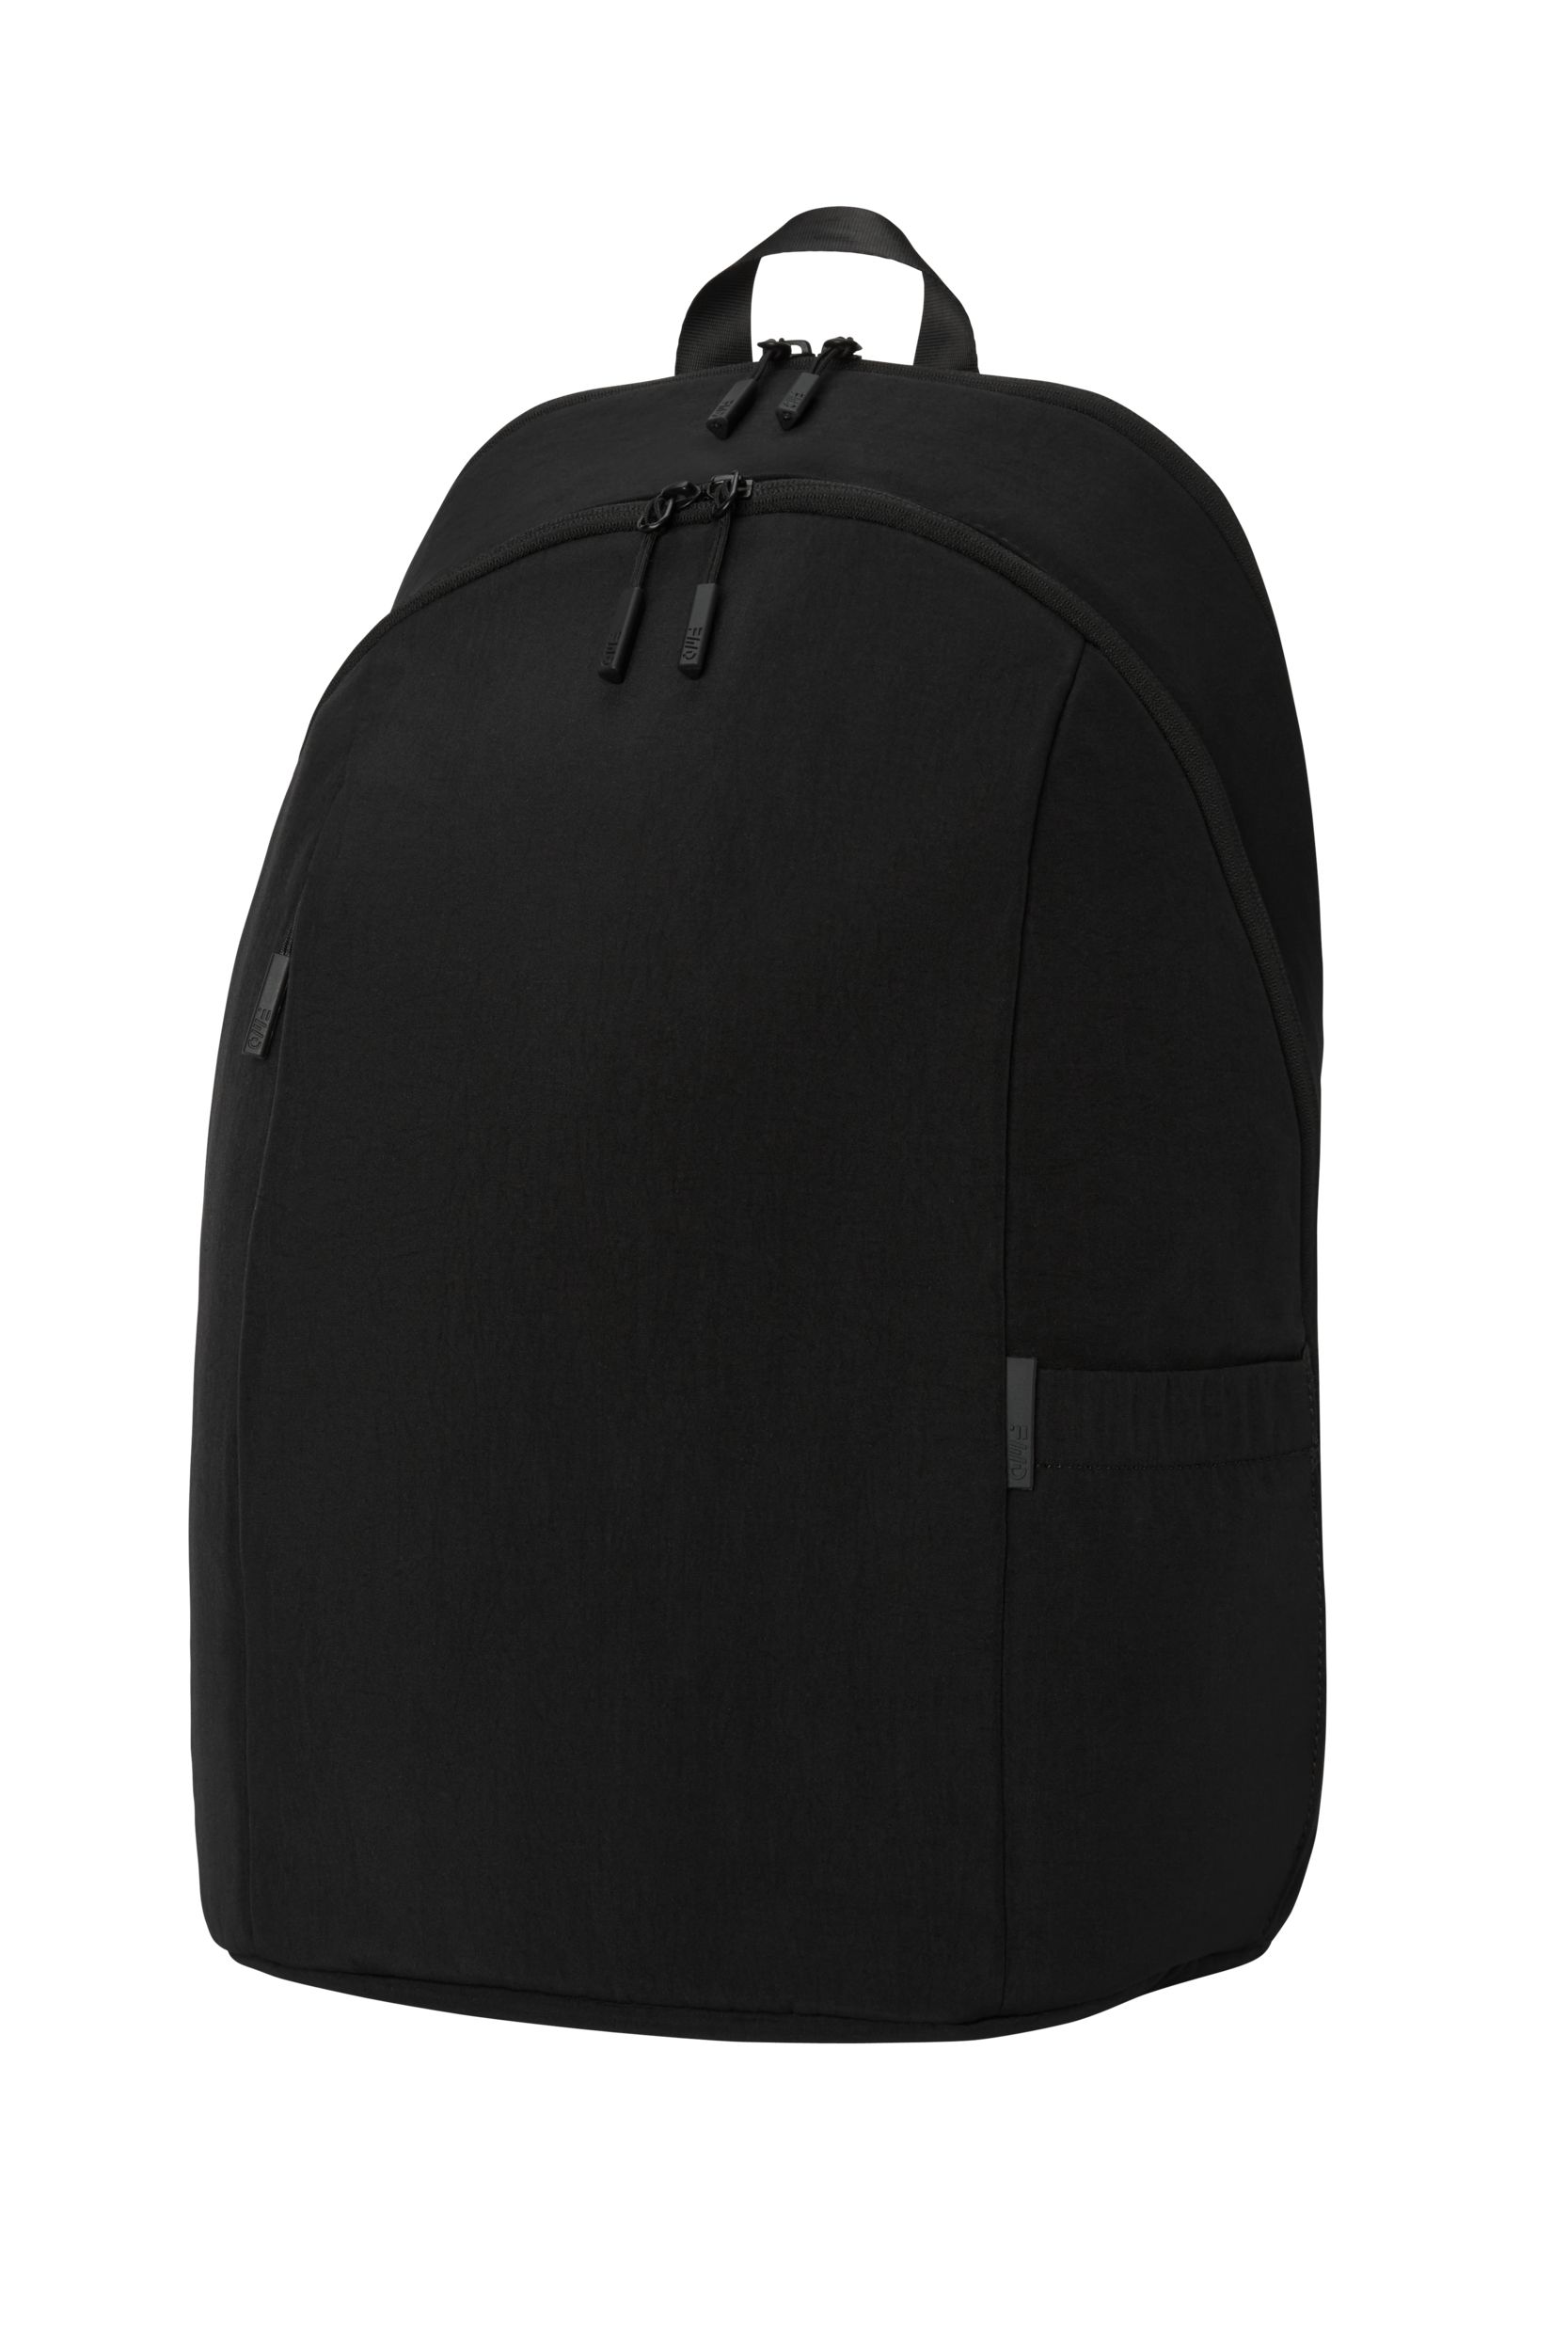 FWD Pleated 24L Backpack | Sportchek